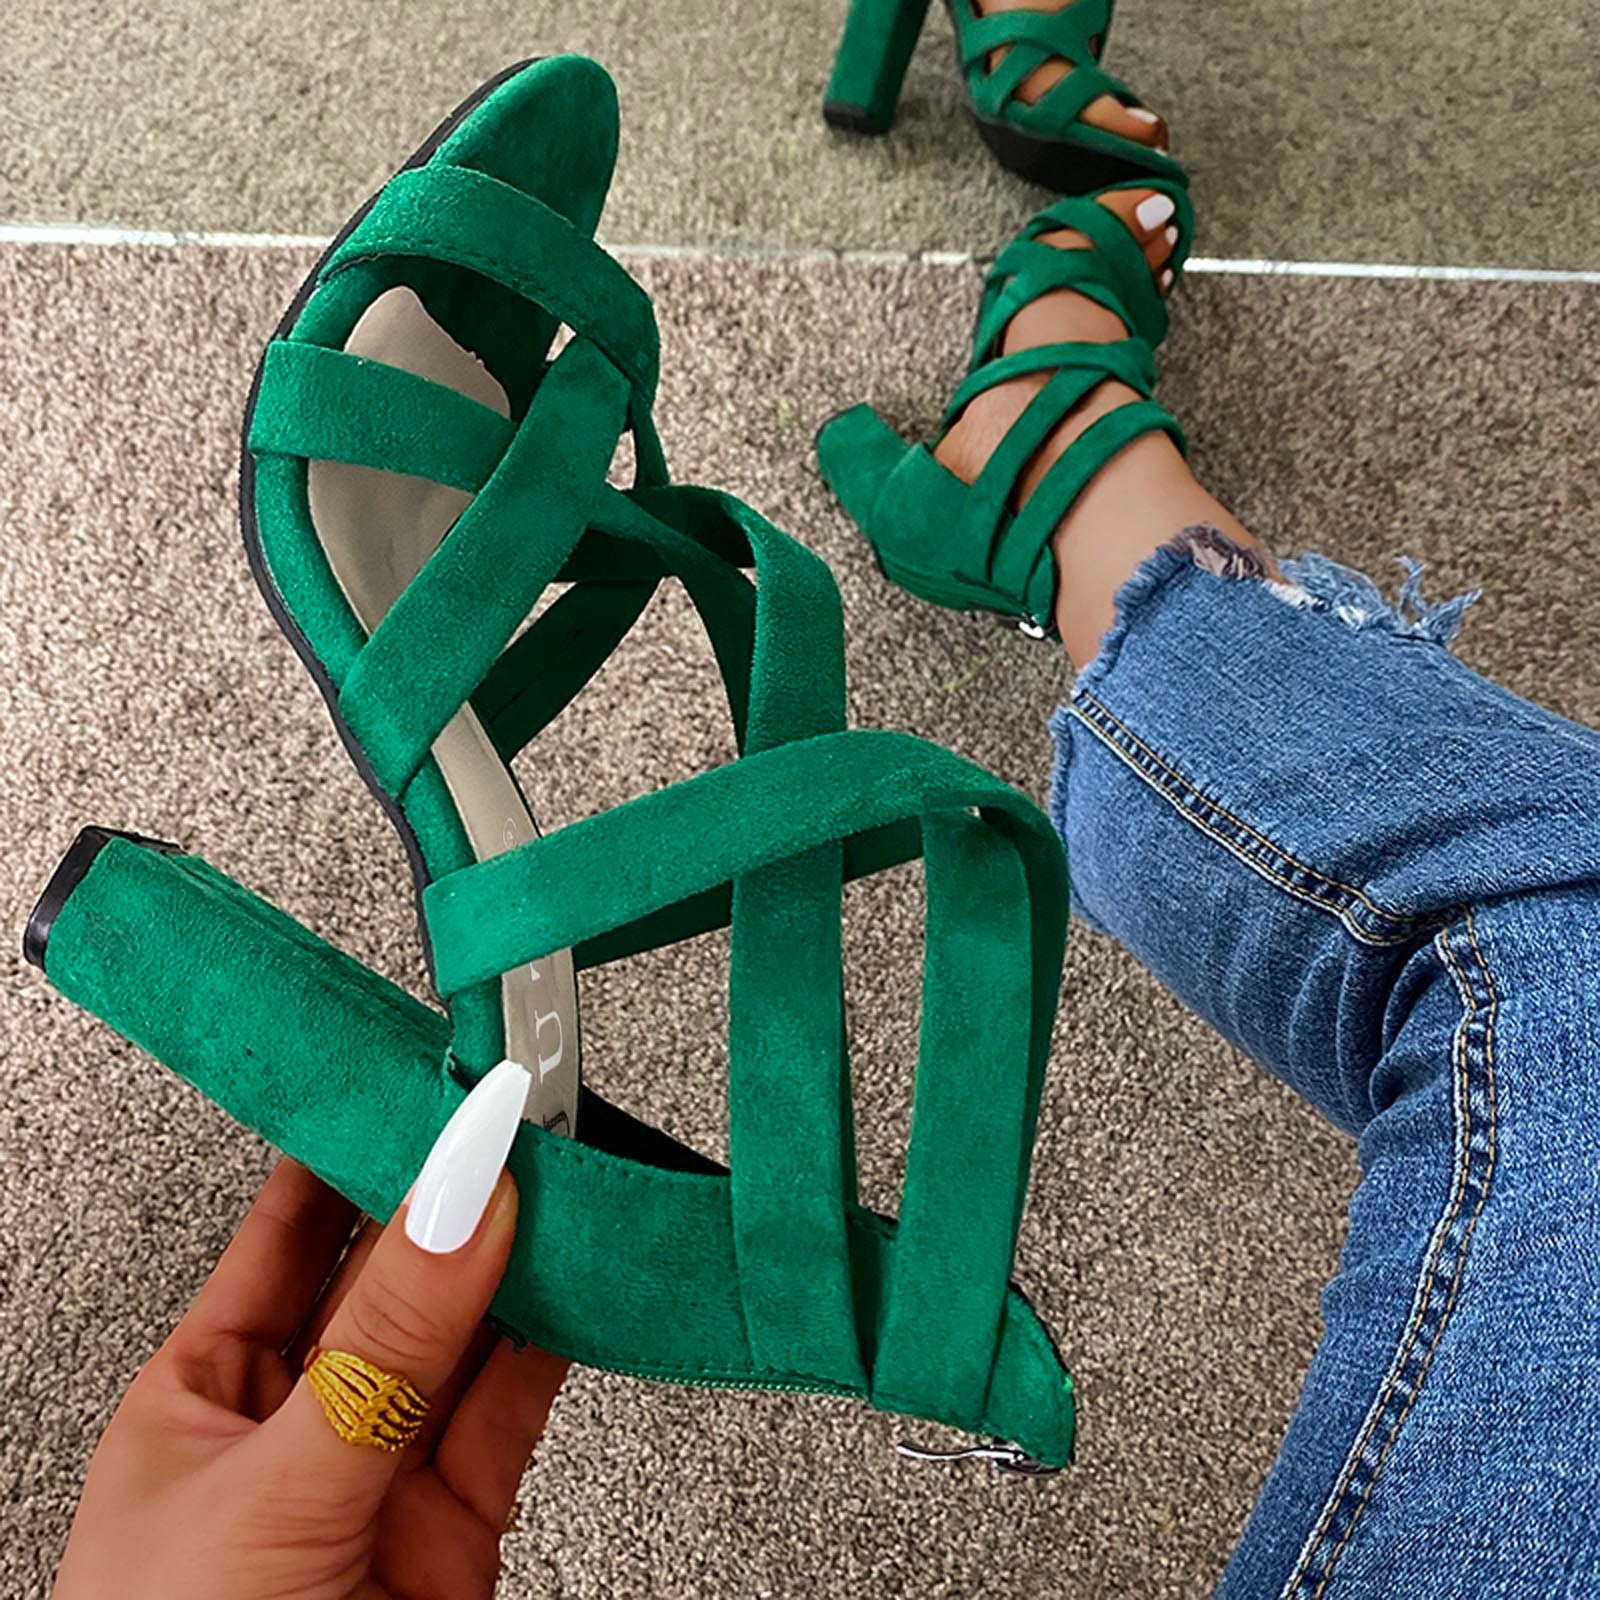 Coral Square Toe Strappy Sandel Heel | Shoes | Green strappy heels, Green  shoes heels, Heels